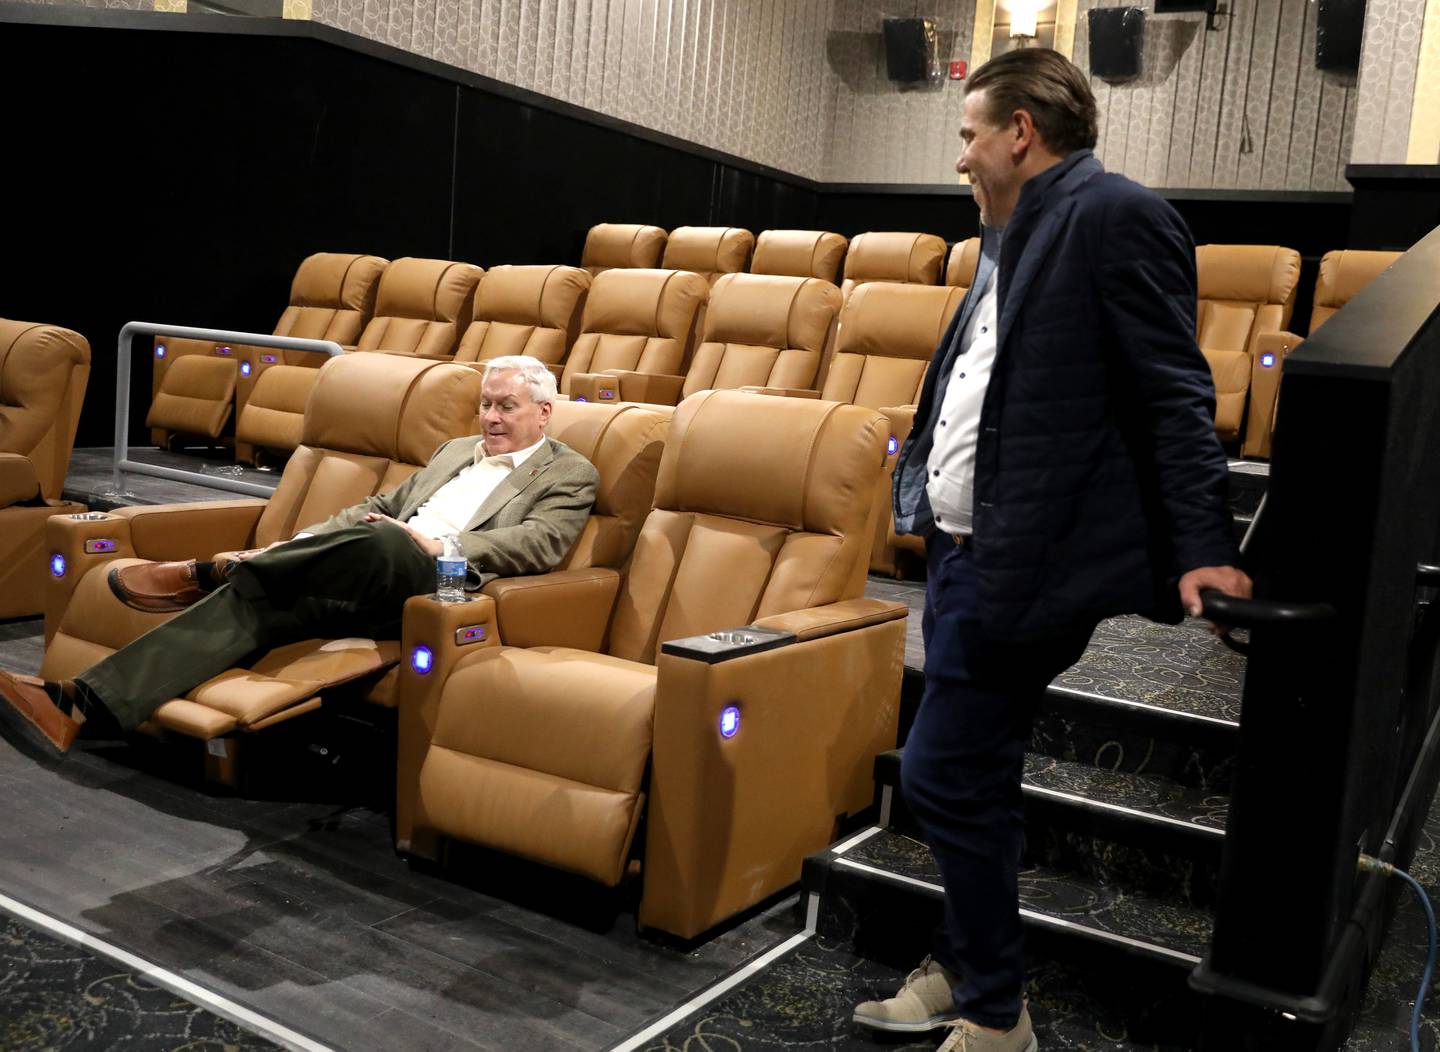 Emagine President and Chairman Paul Glantz (left) and CEO Anthony LaVerde reveal one of the screening rooms of the new Emagine Batavia cinema, which will open to the public on June 1, 2023.